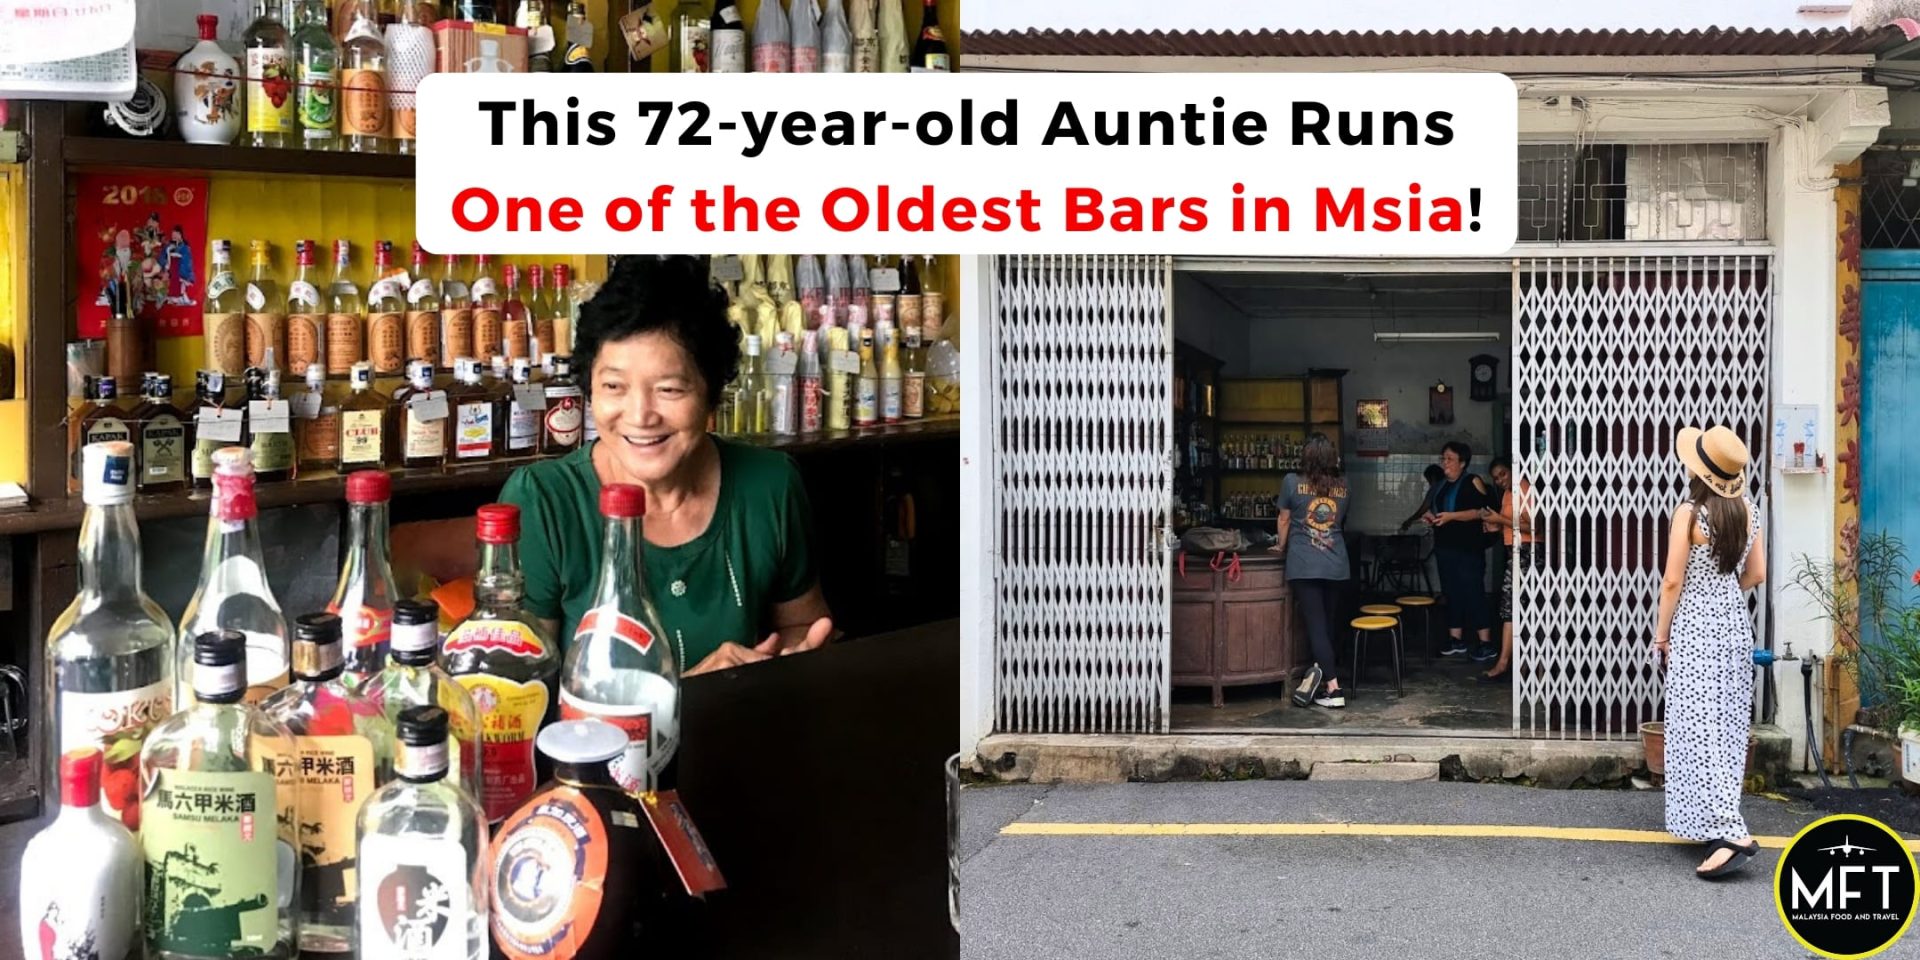 This Chinese Auntie Runs one of the Oldest Bars in Msia!